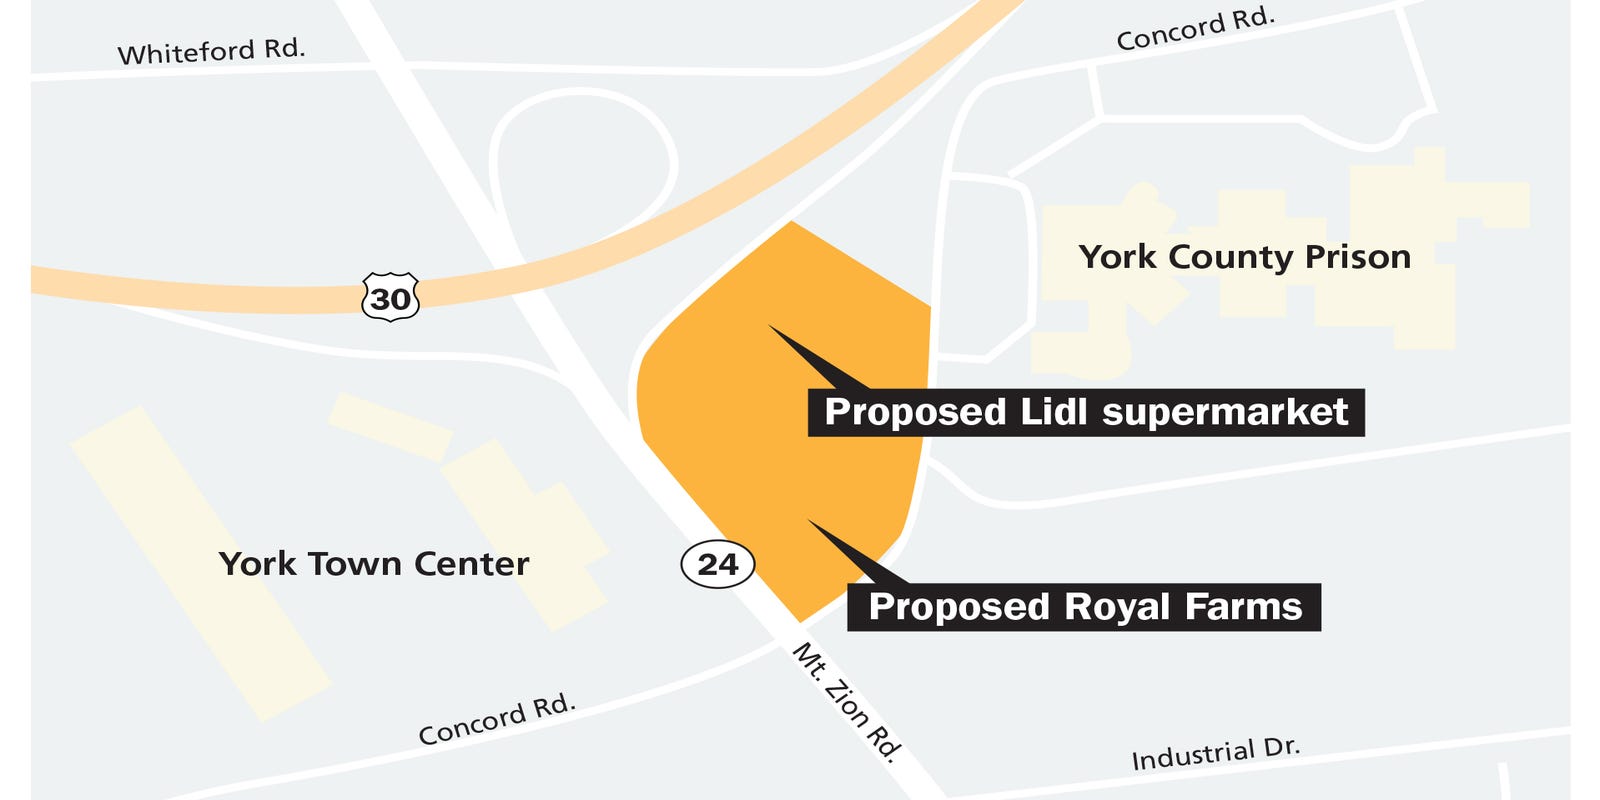 What S Going On With Lidl Supermarket In York County